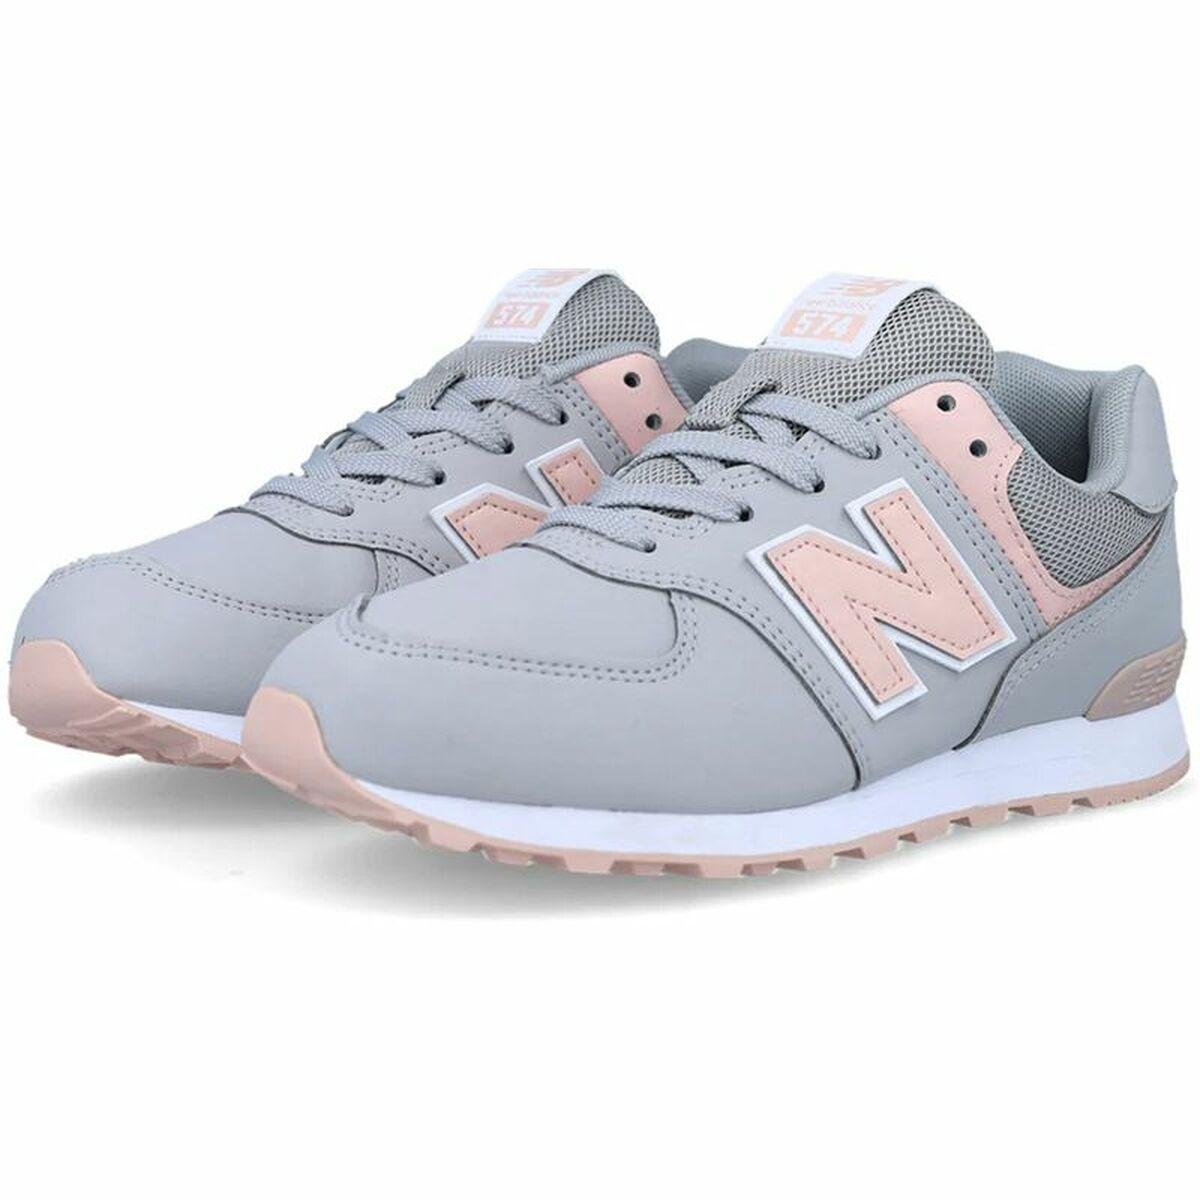 New Balance Women's Casual Trainers 574 Grey Pink in Blue | Lyst